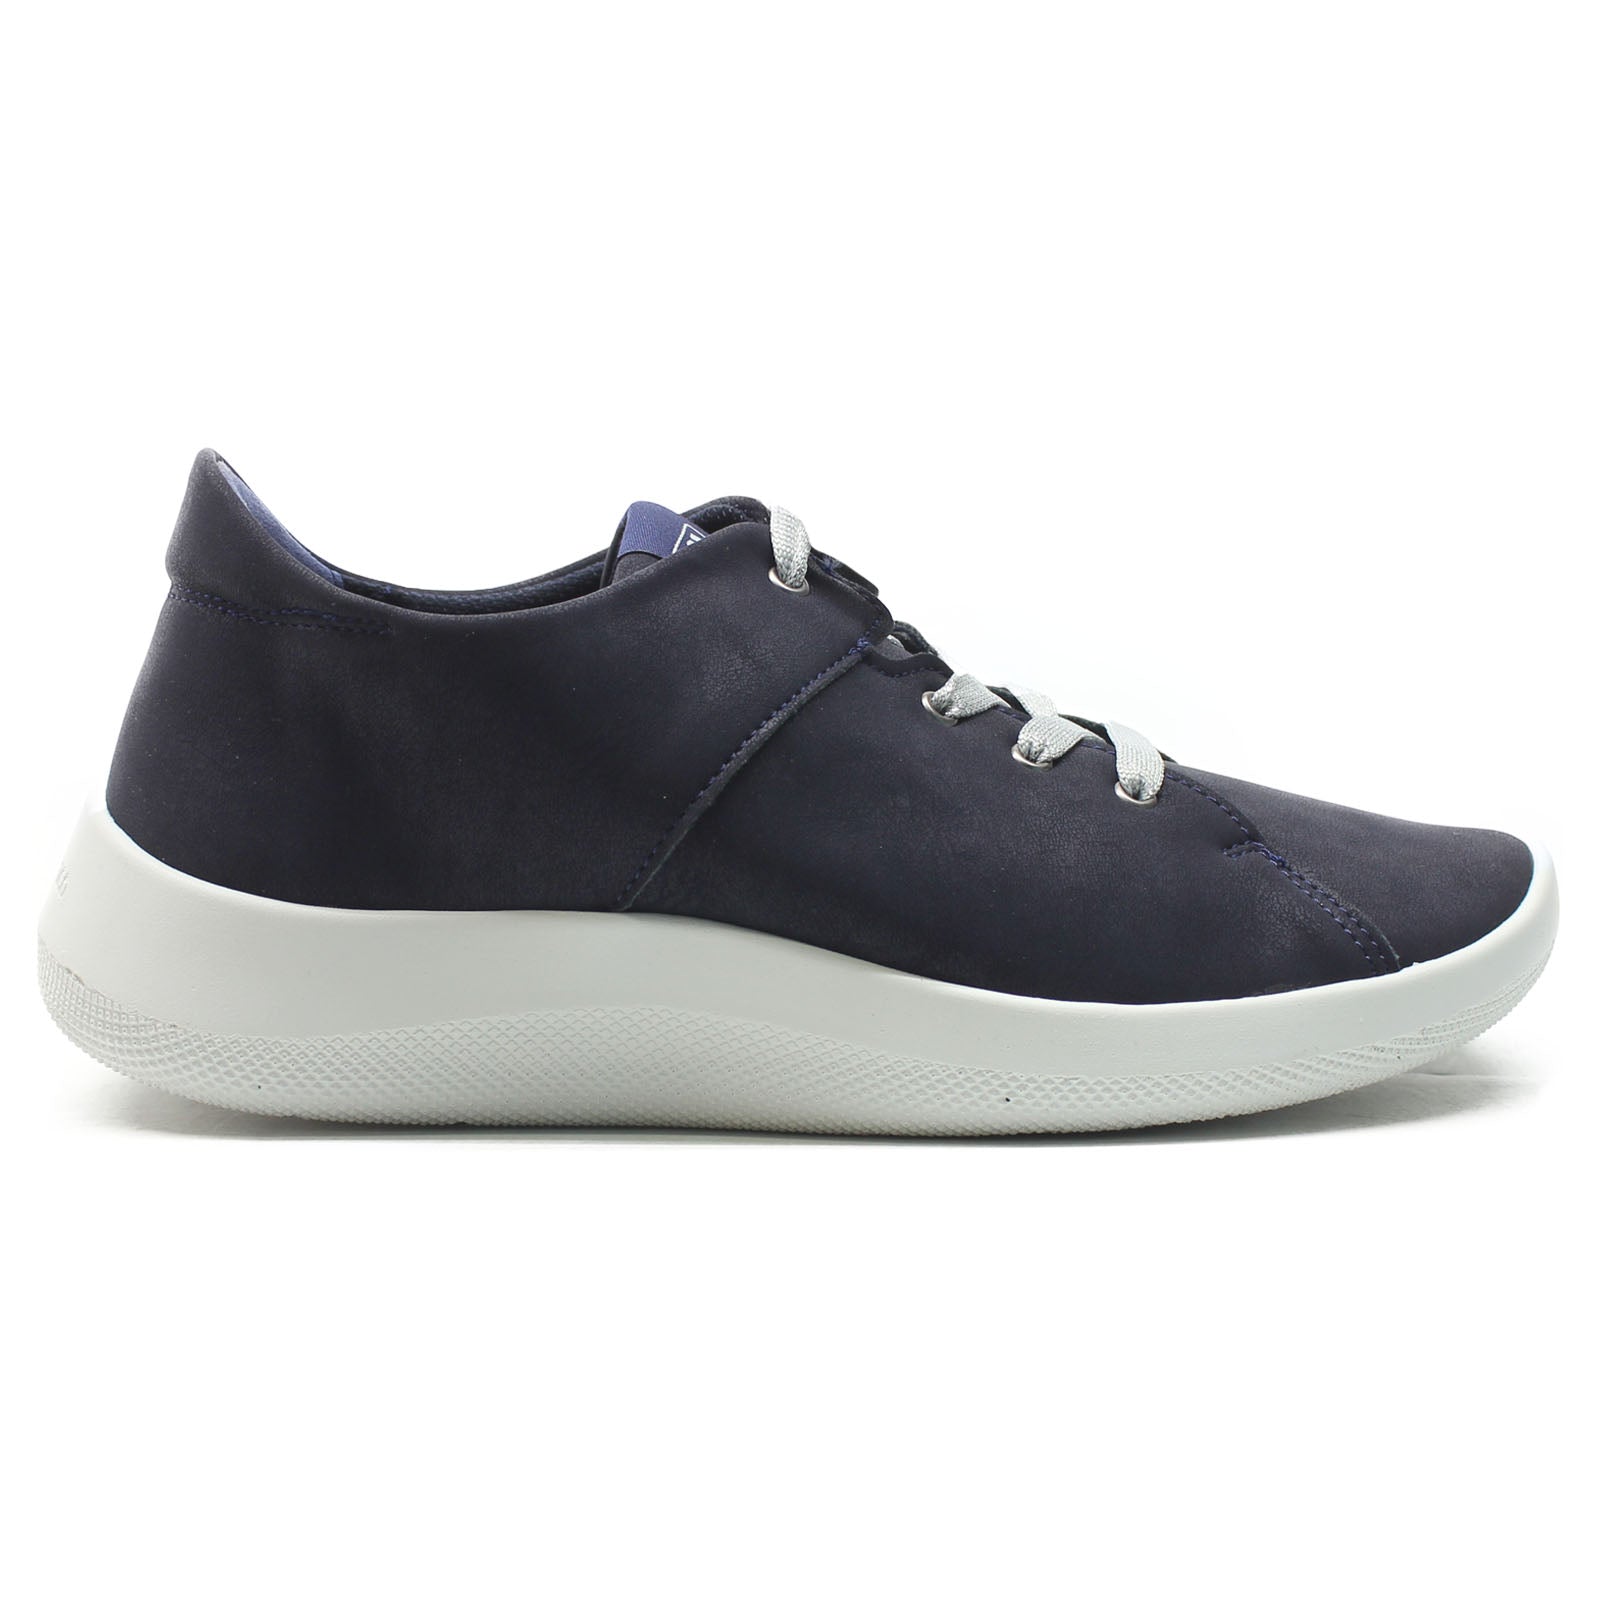 Arcopedico Munique Nubuck Leather Women's Low-top Trainers#color_fal coll navy